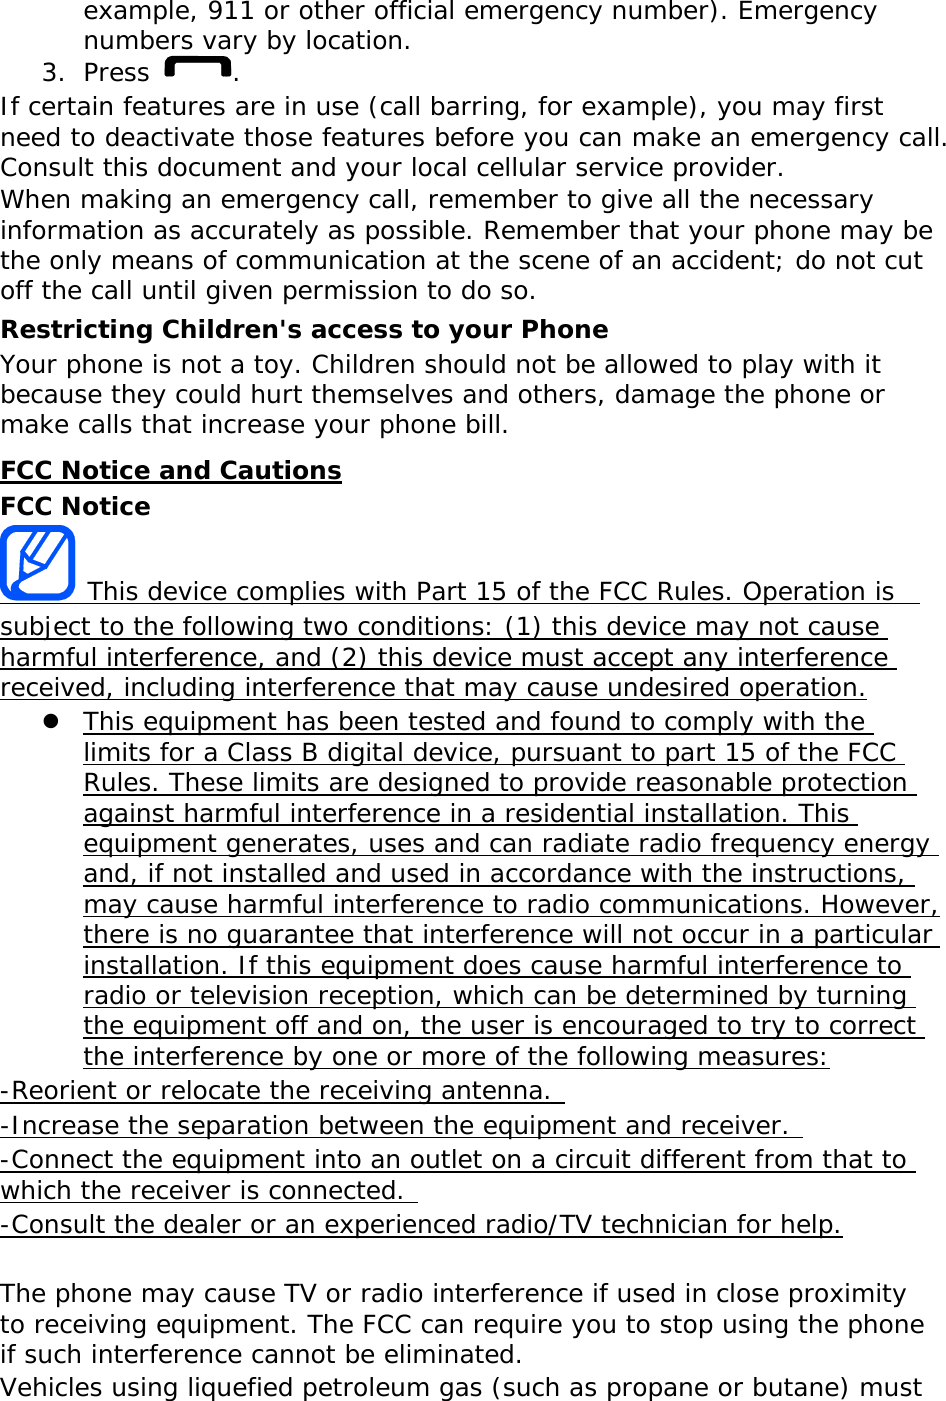 example, 911 or other official emergency number). Emergency numbers vary by location. 3. Press  . If certain features are in use (call barring, for example), you may first need to deactivate those features before you can make an emergency call. Consult this document and your local cellular service provider. When making an emergency call, remember to give all the necessary information as accurately as possible. Remember that your phone may be the only means of communication at the scene of an accident; do not cut off the call until given permission to do so. Restricting Children&apos;s access to your Phone Your phone is not a toy. Children should not be allowed to play with it because they could hurt themselves and others, damage the phone or make calls that increase your phone bill. FCC Notice and Cautions FCC Notice  This device complies with Part 15 of the FCC Rules. Operation is  subject to the following two conditions: (1) this device may not cause harmful interference, and (2) this device must accept any interference received, including interference that may cause undesired operation.  This equipment has been tested and found to comply with the limits for a Class B digital device, pursuant to part 15 of the FCC Rules. These limits are designed to provide reasonable protection against harmful interference in a residential installation. This equipment generates, uses and can radiate radio frequency energy and, if not installed and used in accordance with the instructions, may cause harmful interference to radio communications. However, there is no guarantee that interference will not occur in a particular installation. If this equipment does cause harmful interference to radio or television reception, which can be determined by turning the equipment off and on, the user is encouraged to try to correct the interference by one or more of the following measures: -Reorient or relocate the receiving antenna.  -Increase the separation between the equipment and receiver.  -Connect the equipment into an outlet on a circuit different from that to which the receiver is connected.  -Consult the dealer or an experienced radio/TV technician for help.  The phone may cause TV or radio interference if used in close proximity to receiving equipment. The FCC can require you to stop using the phone if such interference cannot be eliminated. Vehicles using liquefied petroleum gas (such as propane or butane) must 